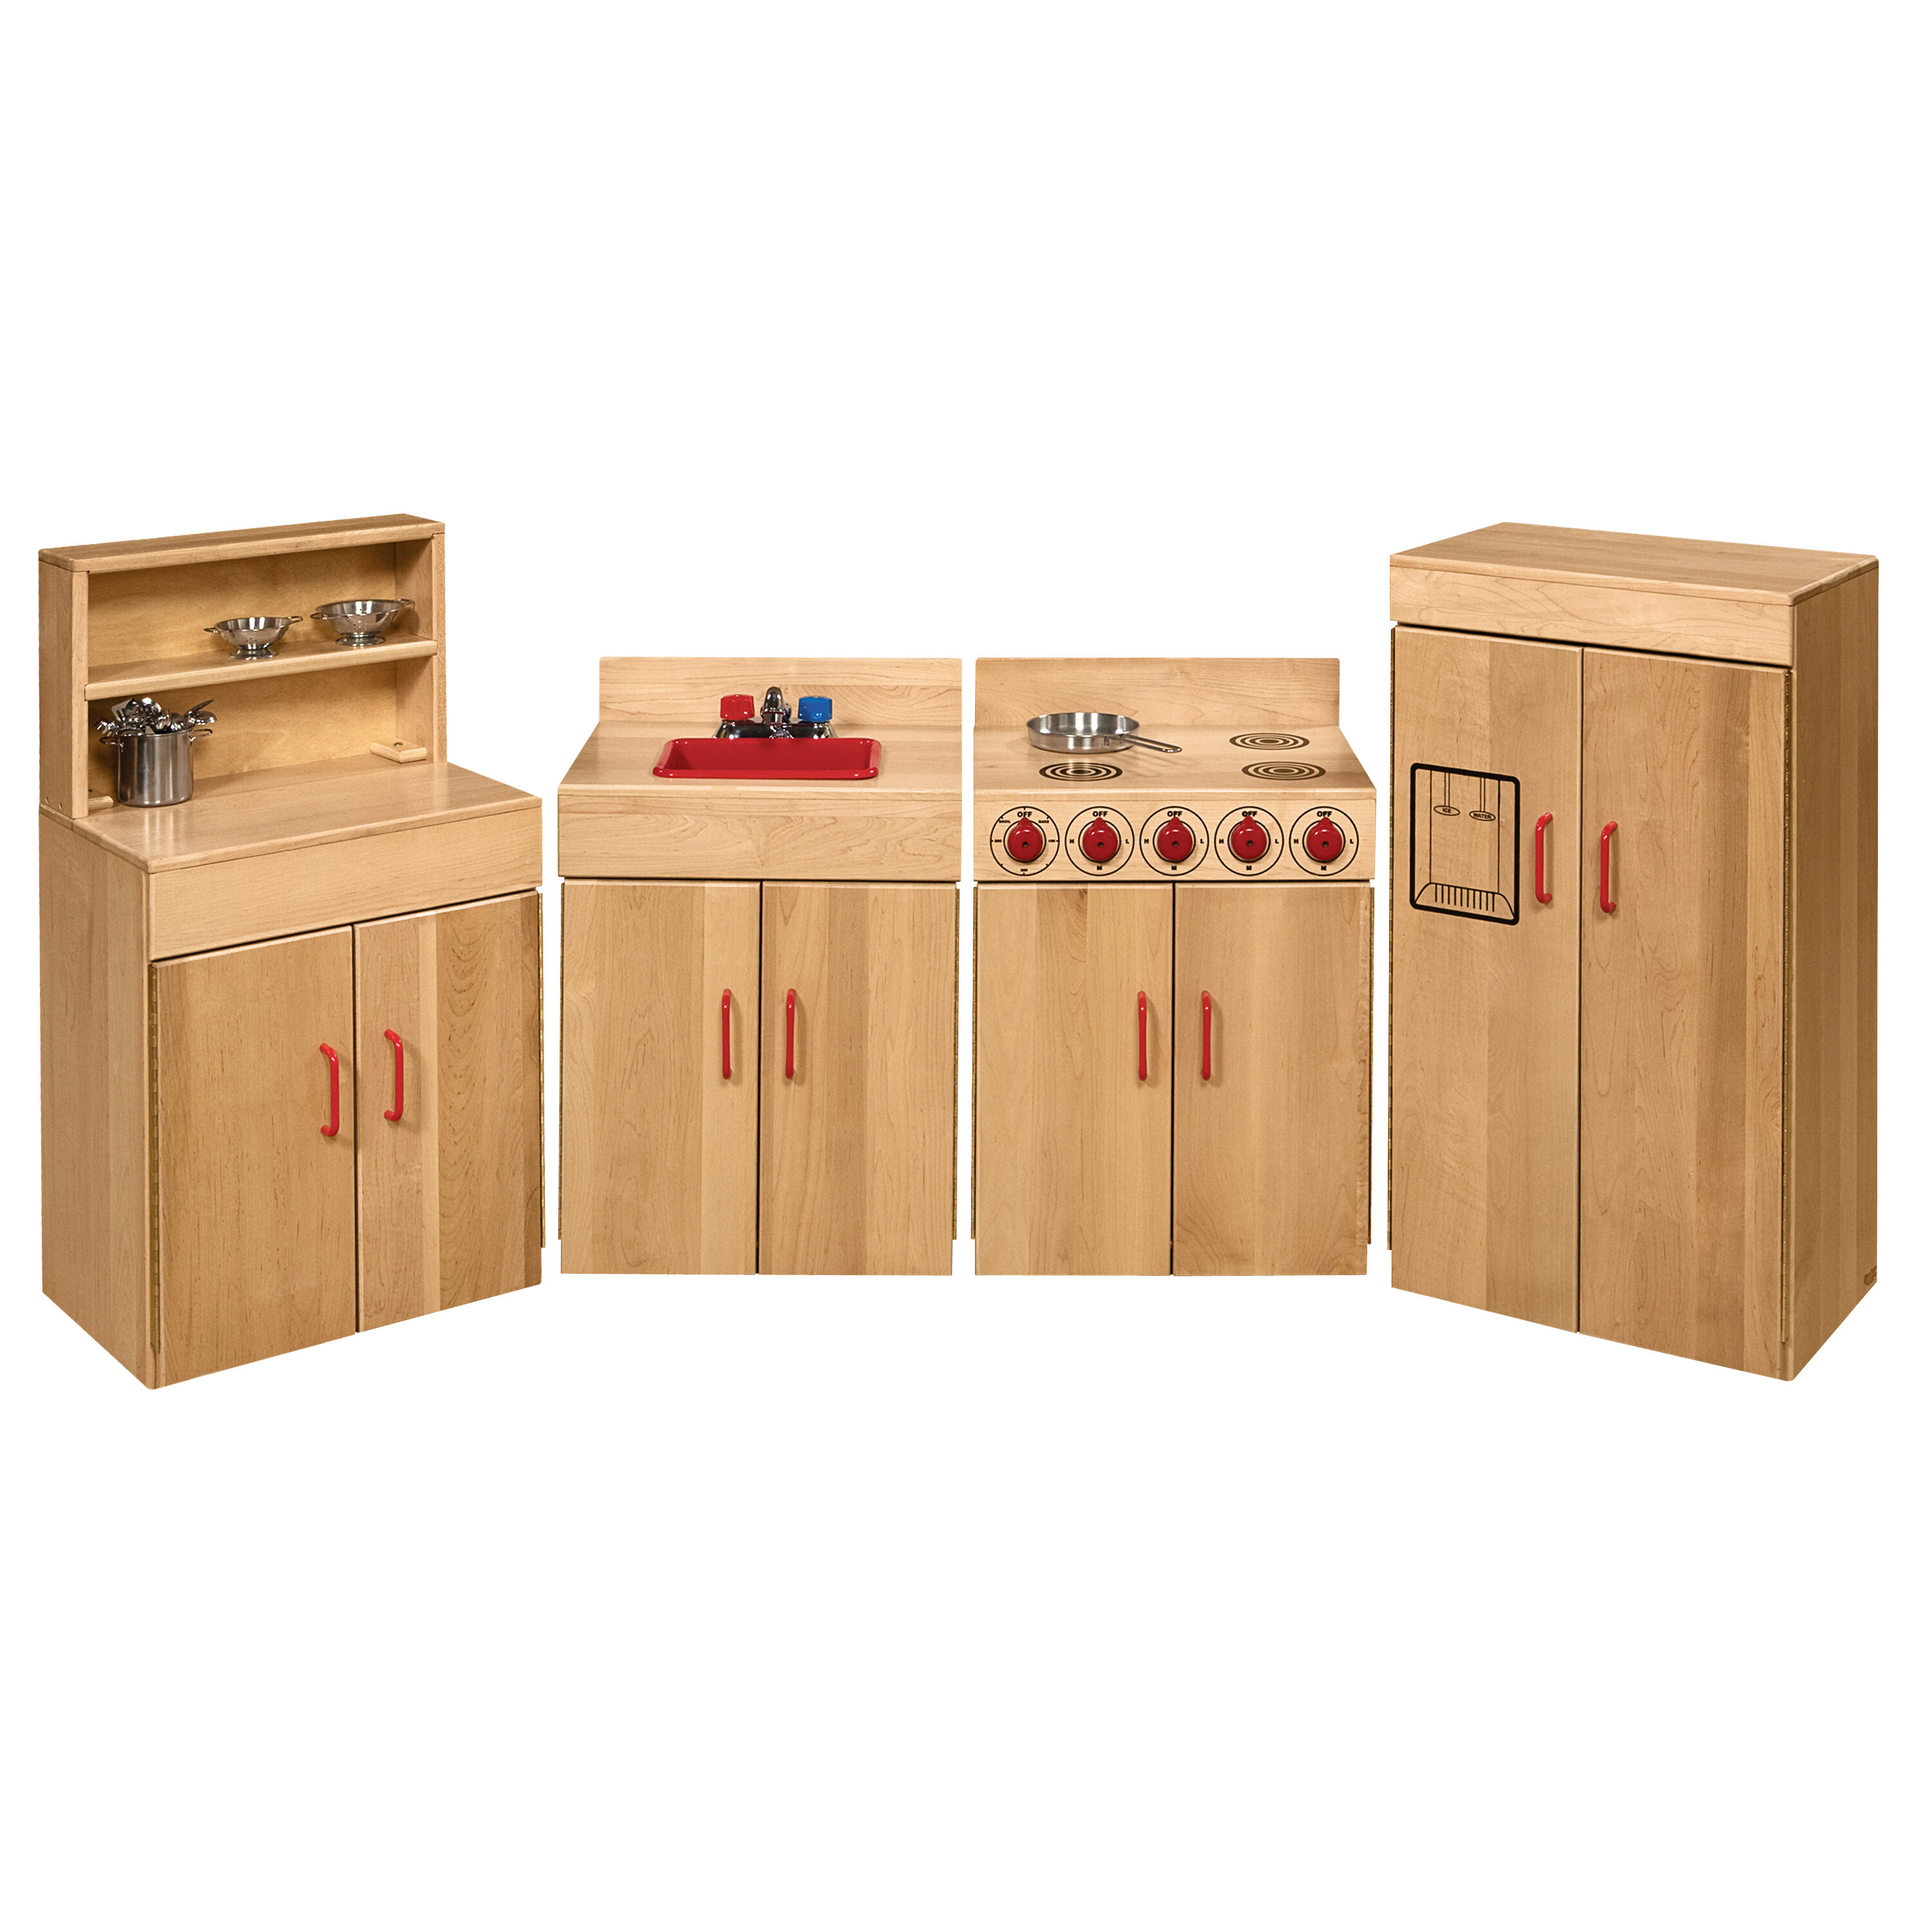 Solid Wood Play Kitchen Sets 